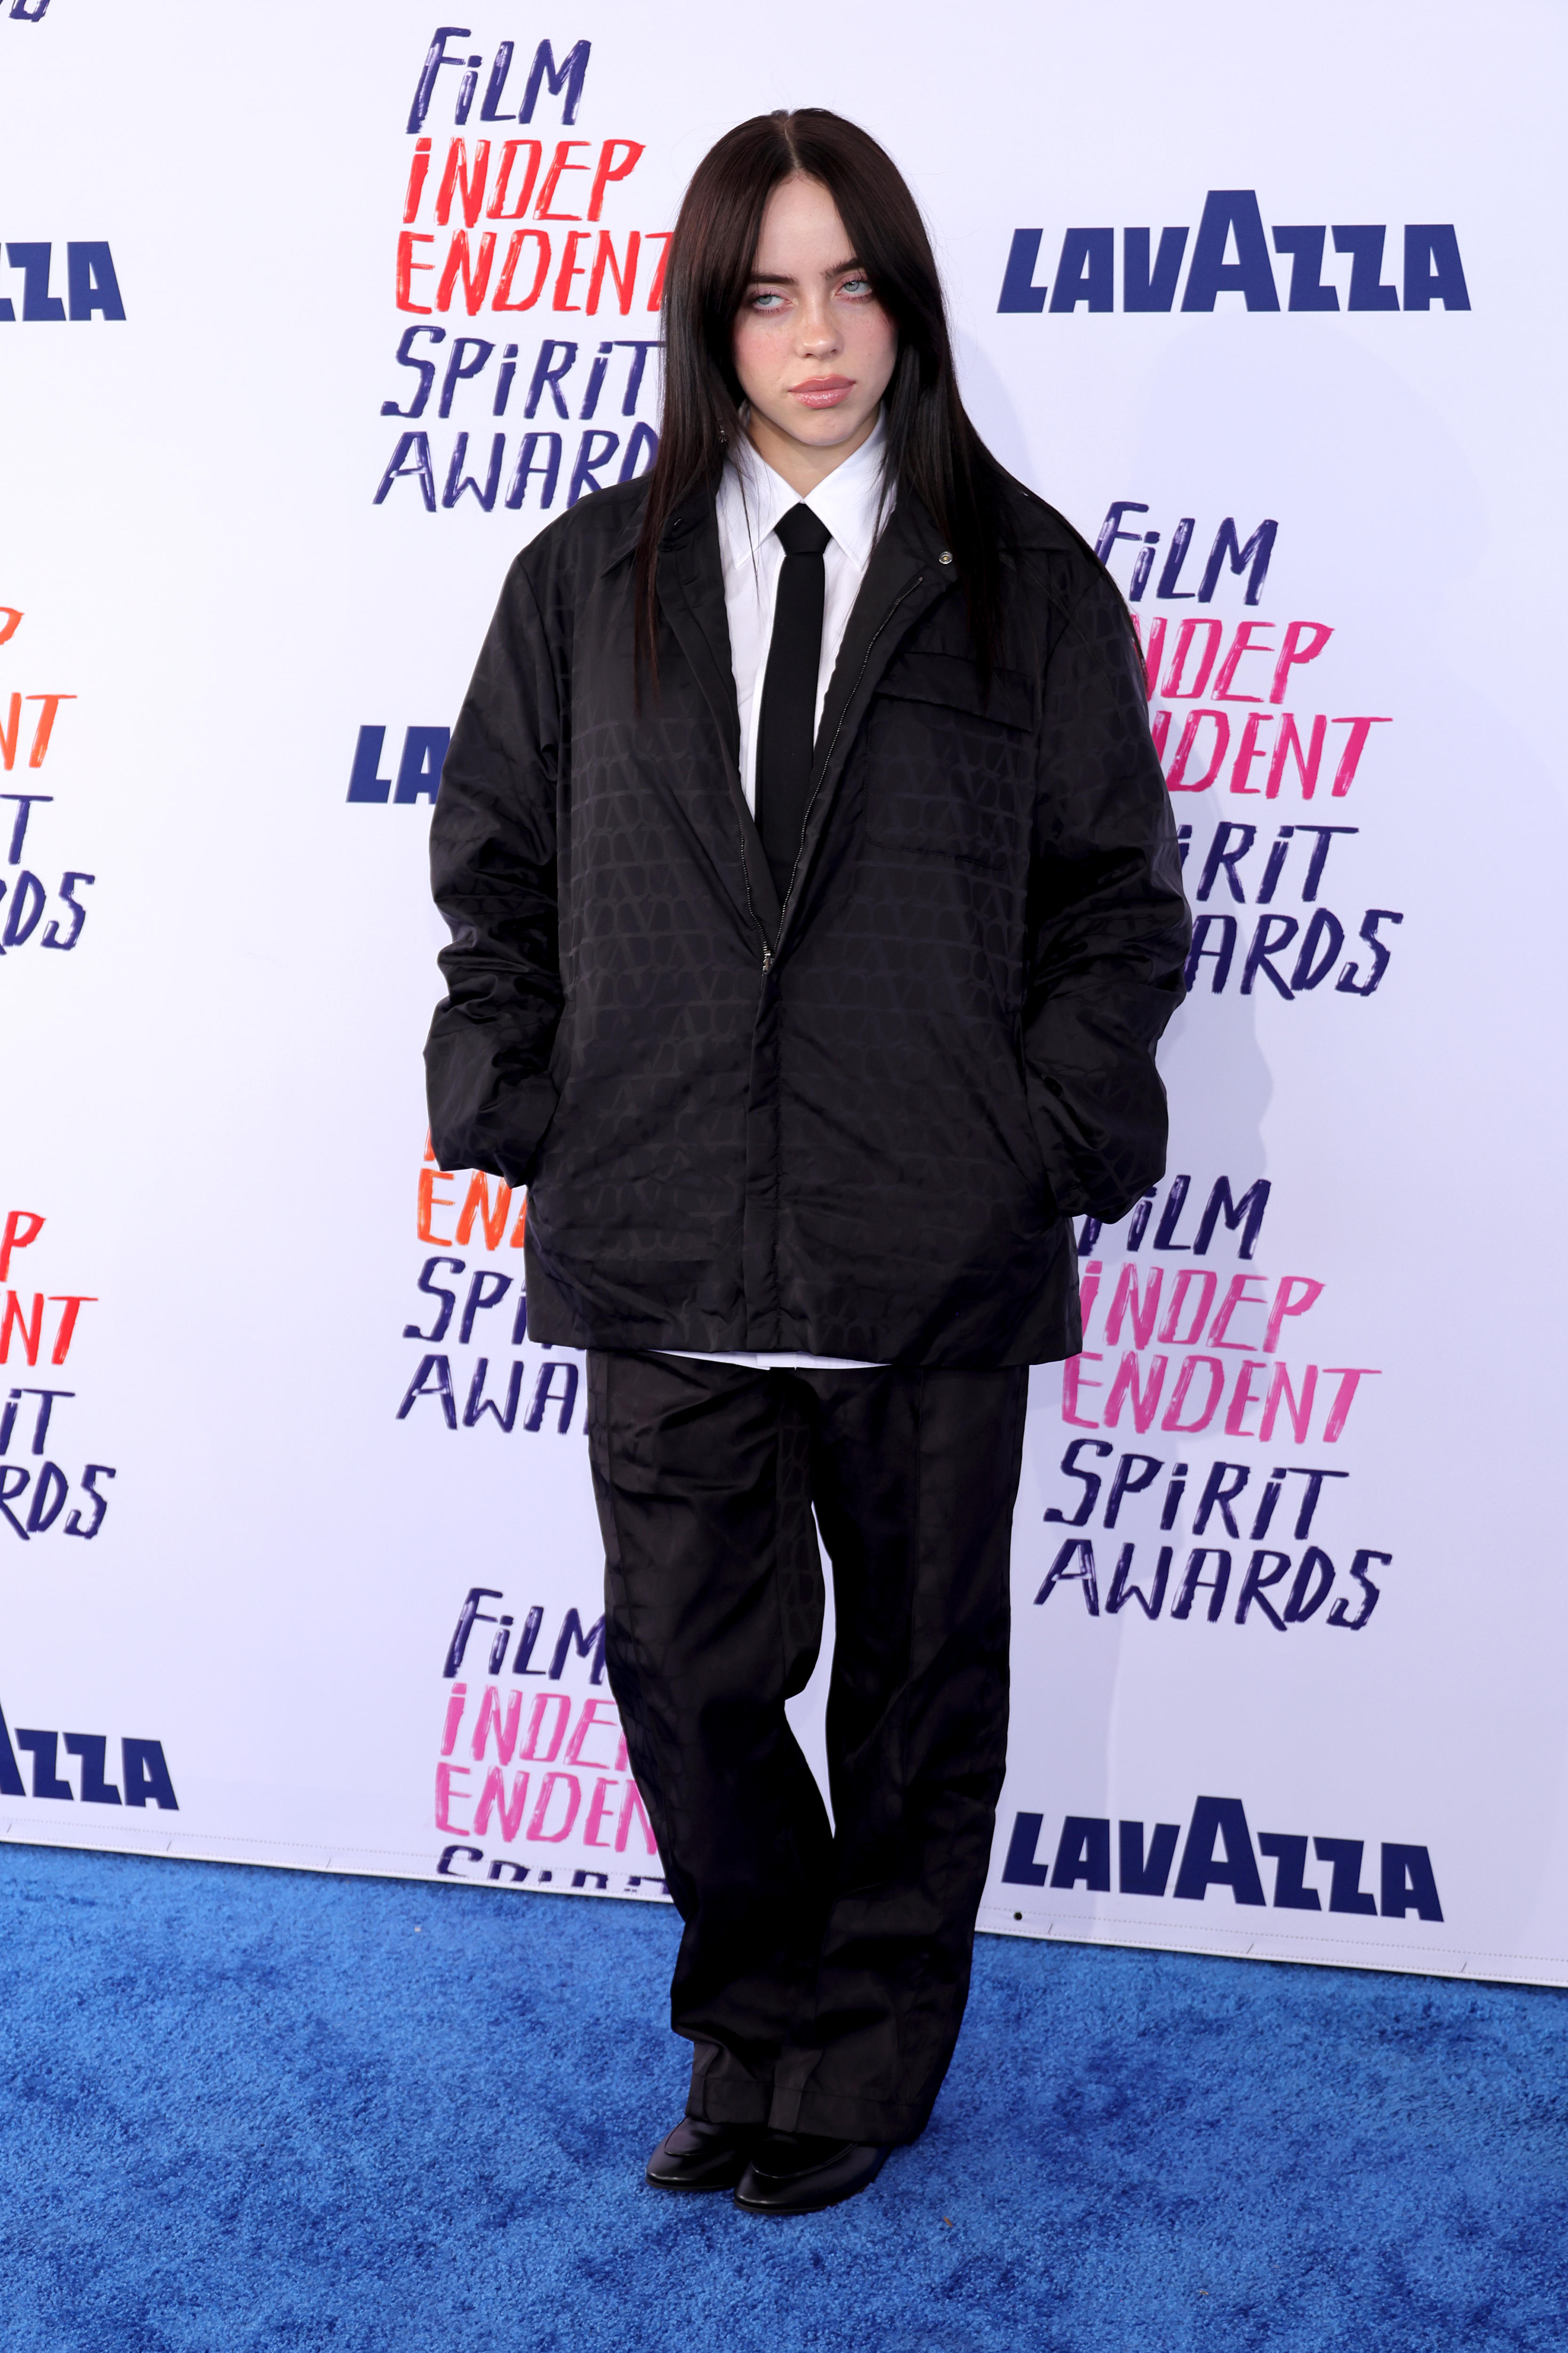 Billie Eilish poses on the red carpet at the Independent Spirit awards